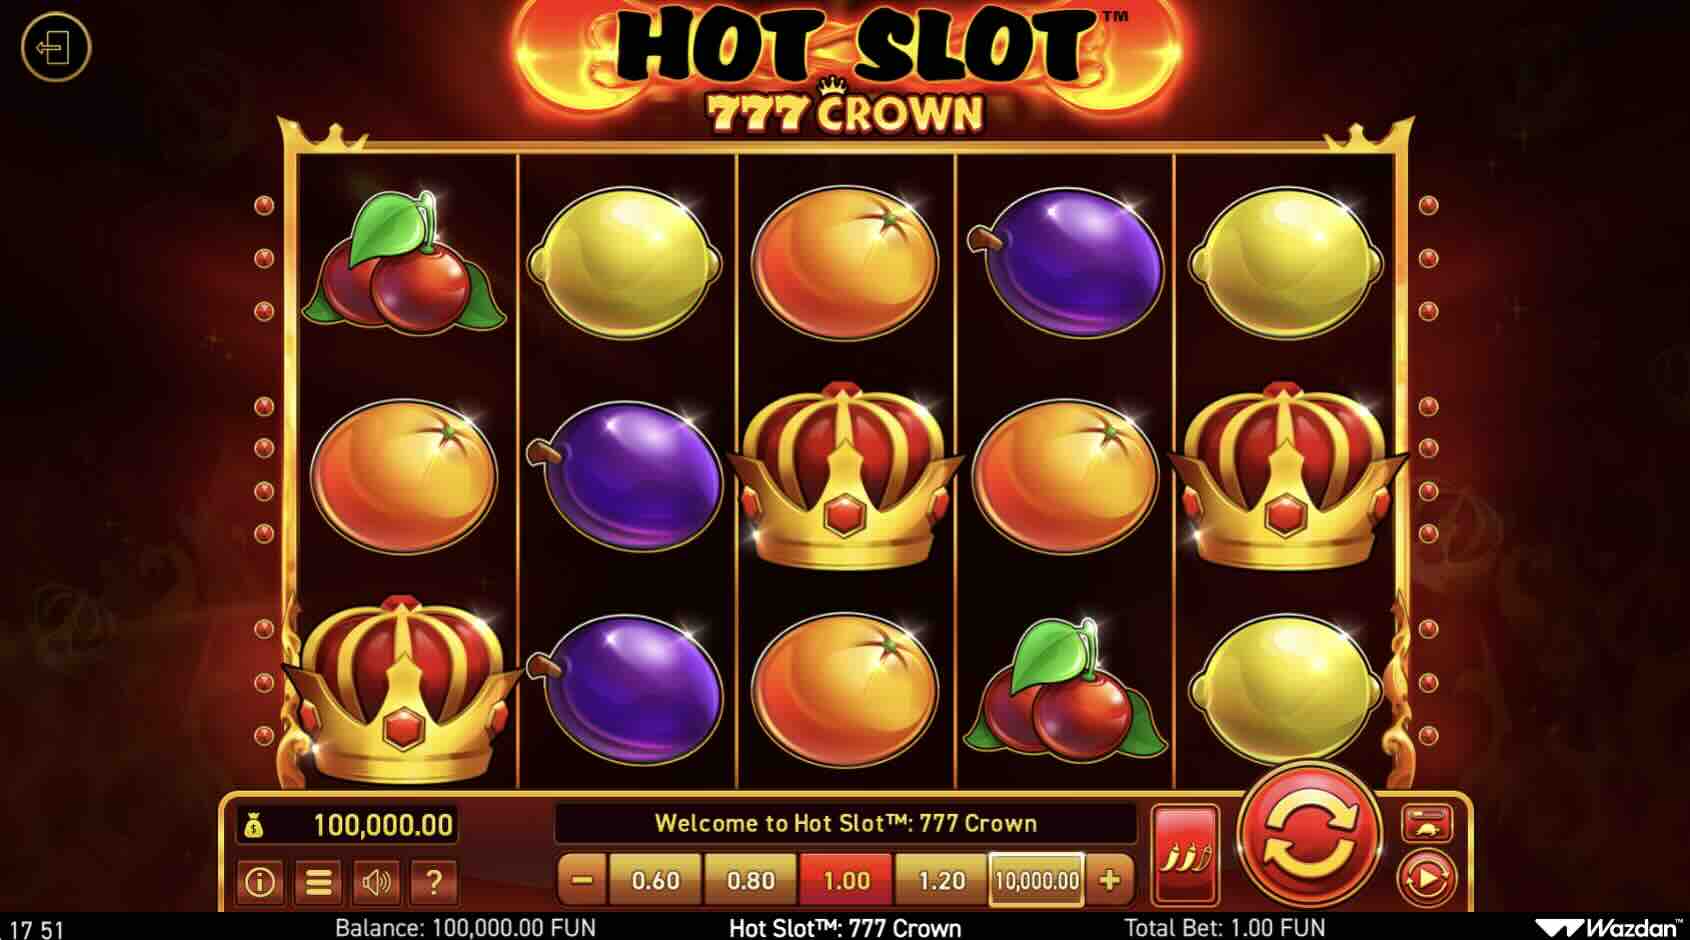 Hot Slot 777 Crown Extremely Light